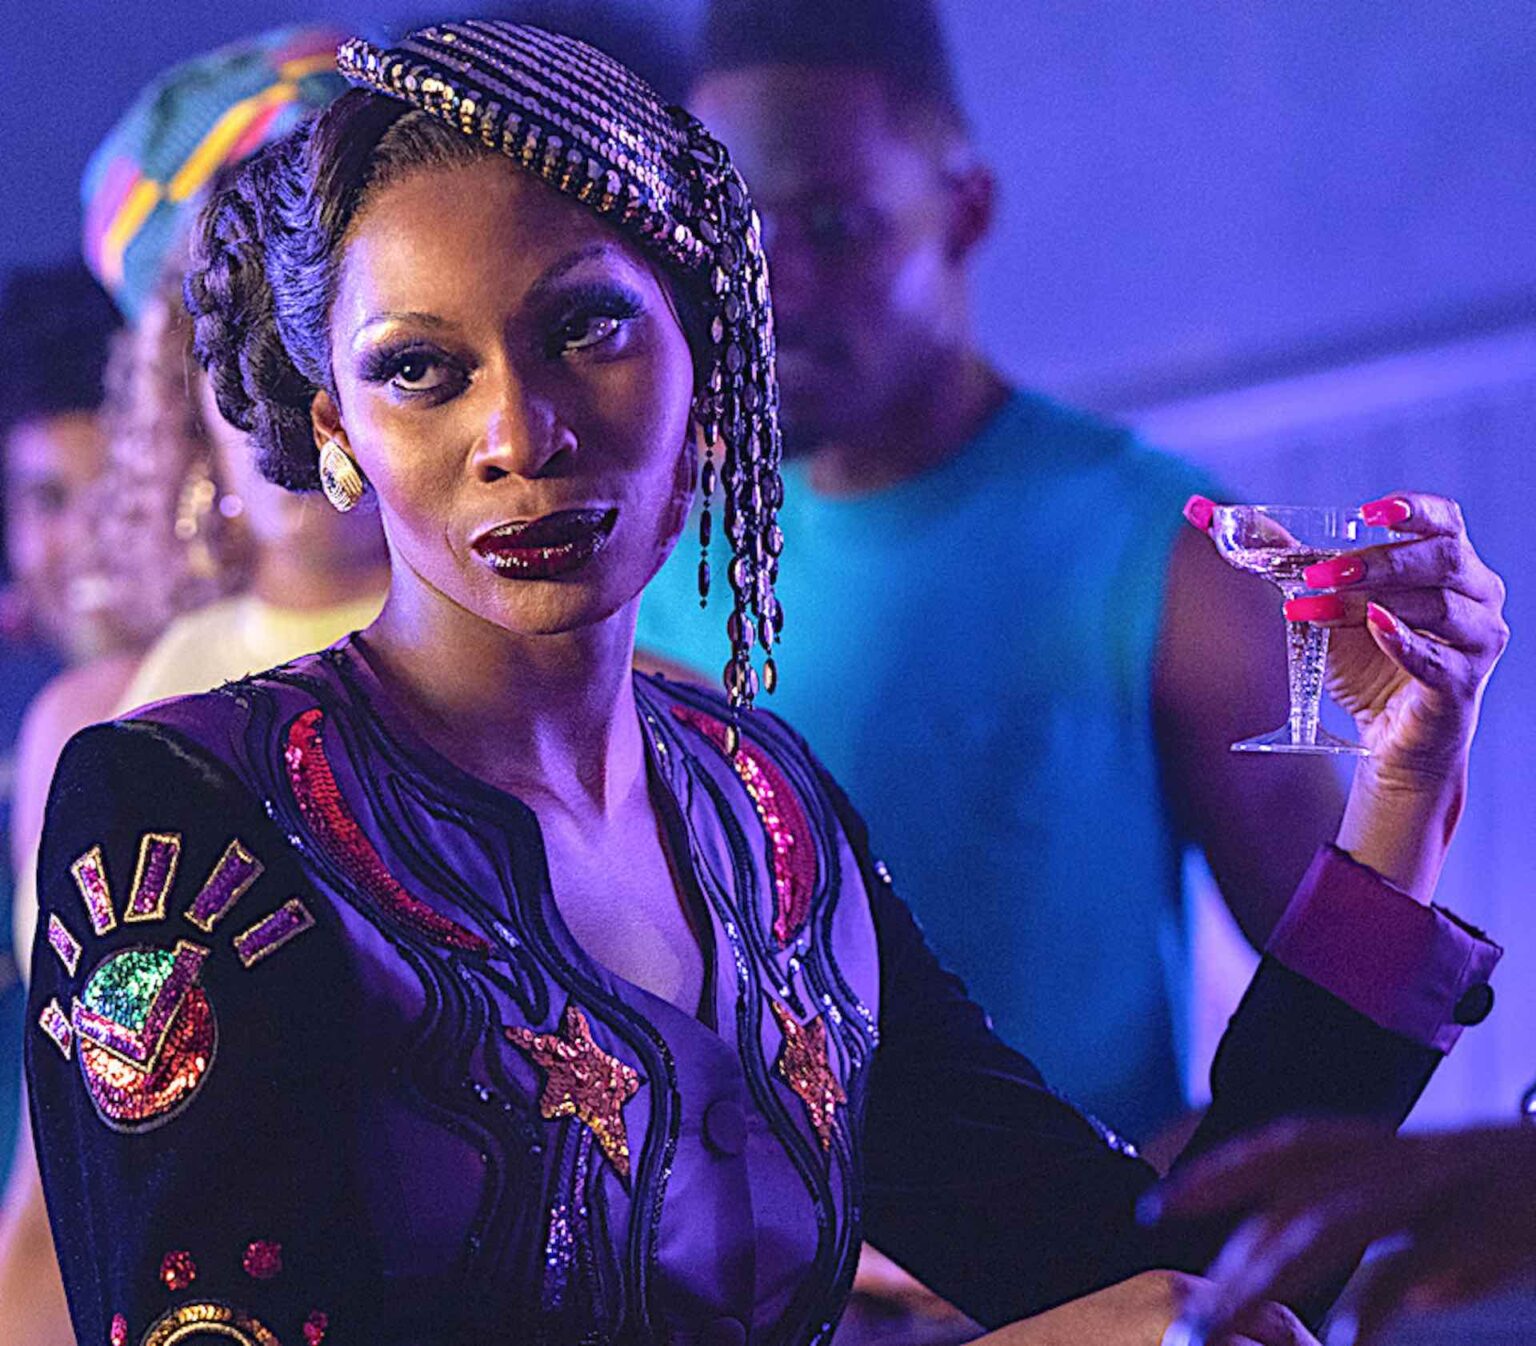 Cast member Elektra is the drag mother of all drag mothers, serving stunning looks in every episode of 'Pose'. Here are a few favorite lewks.